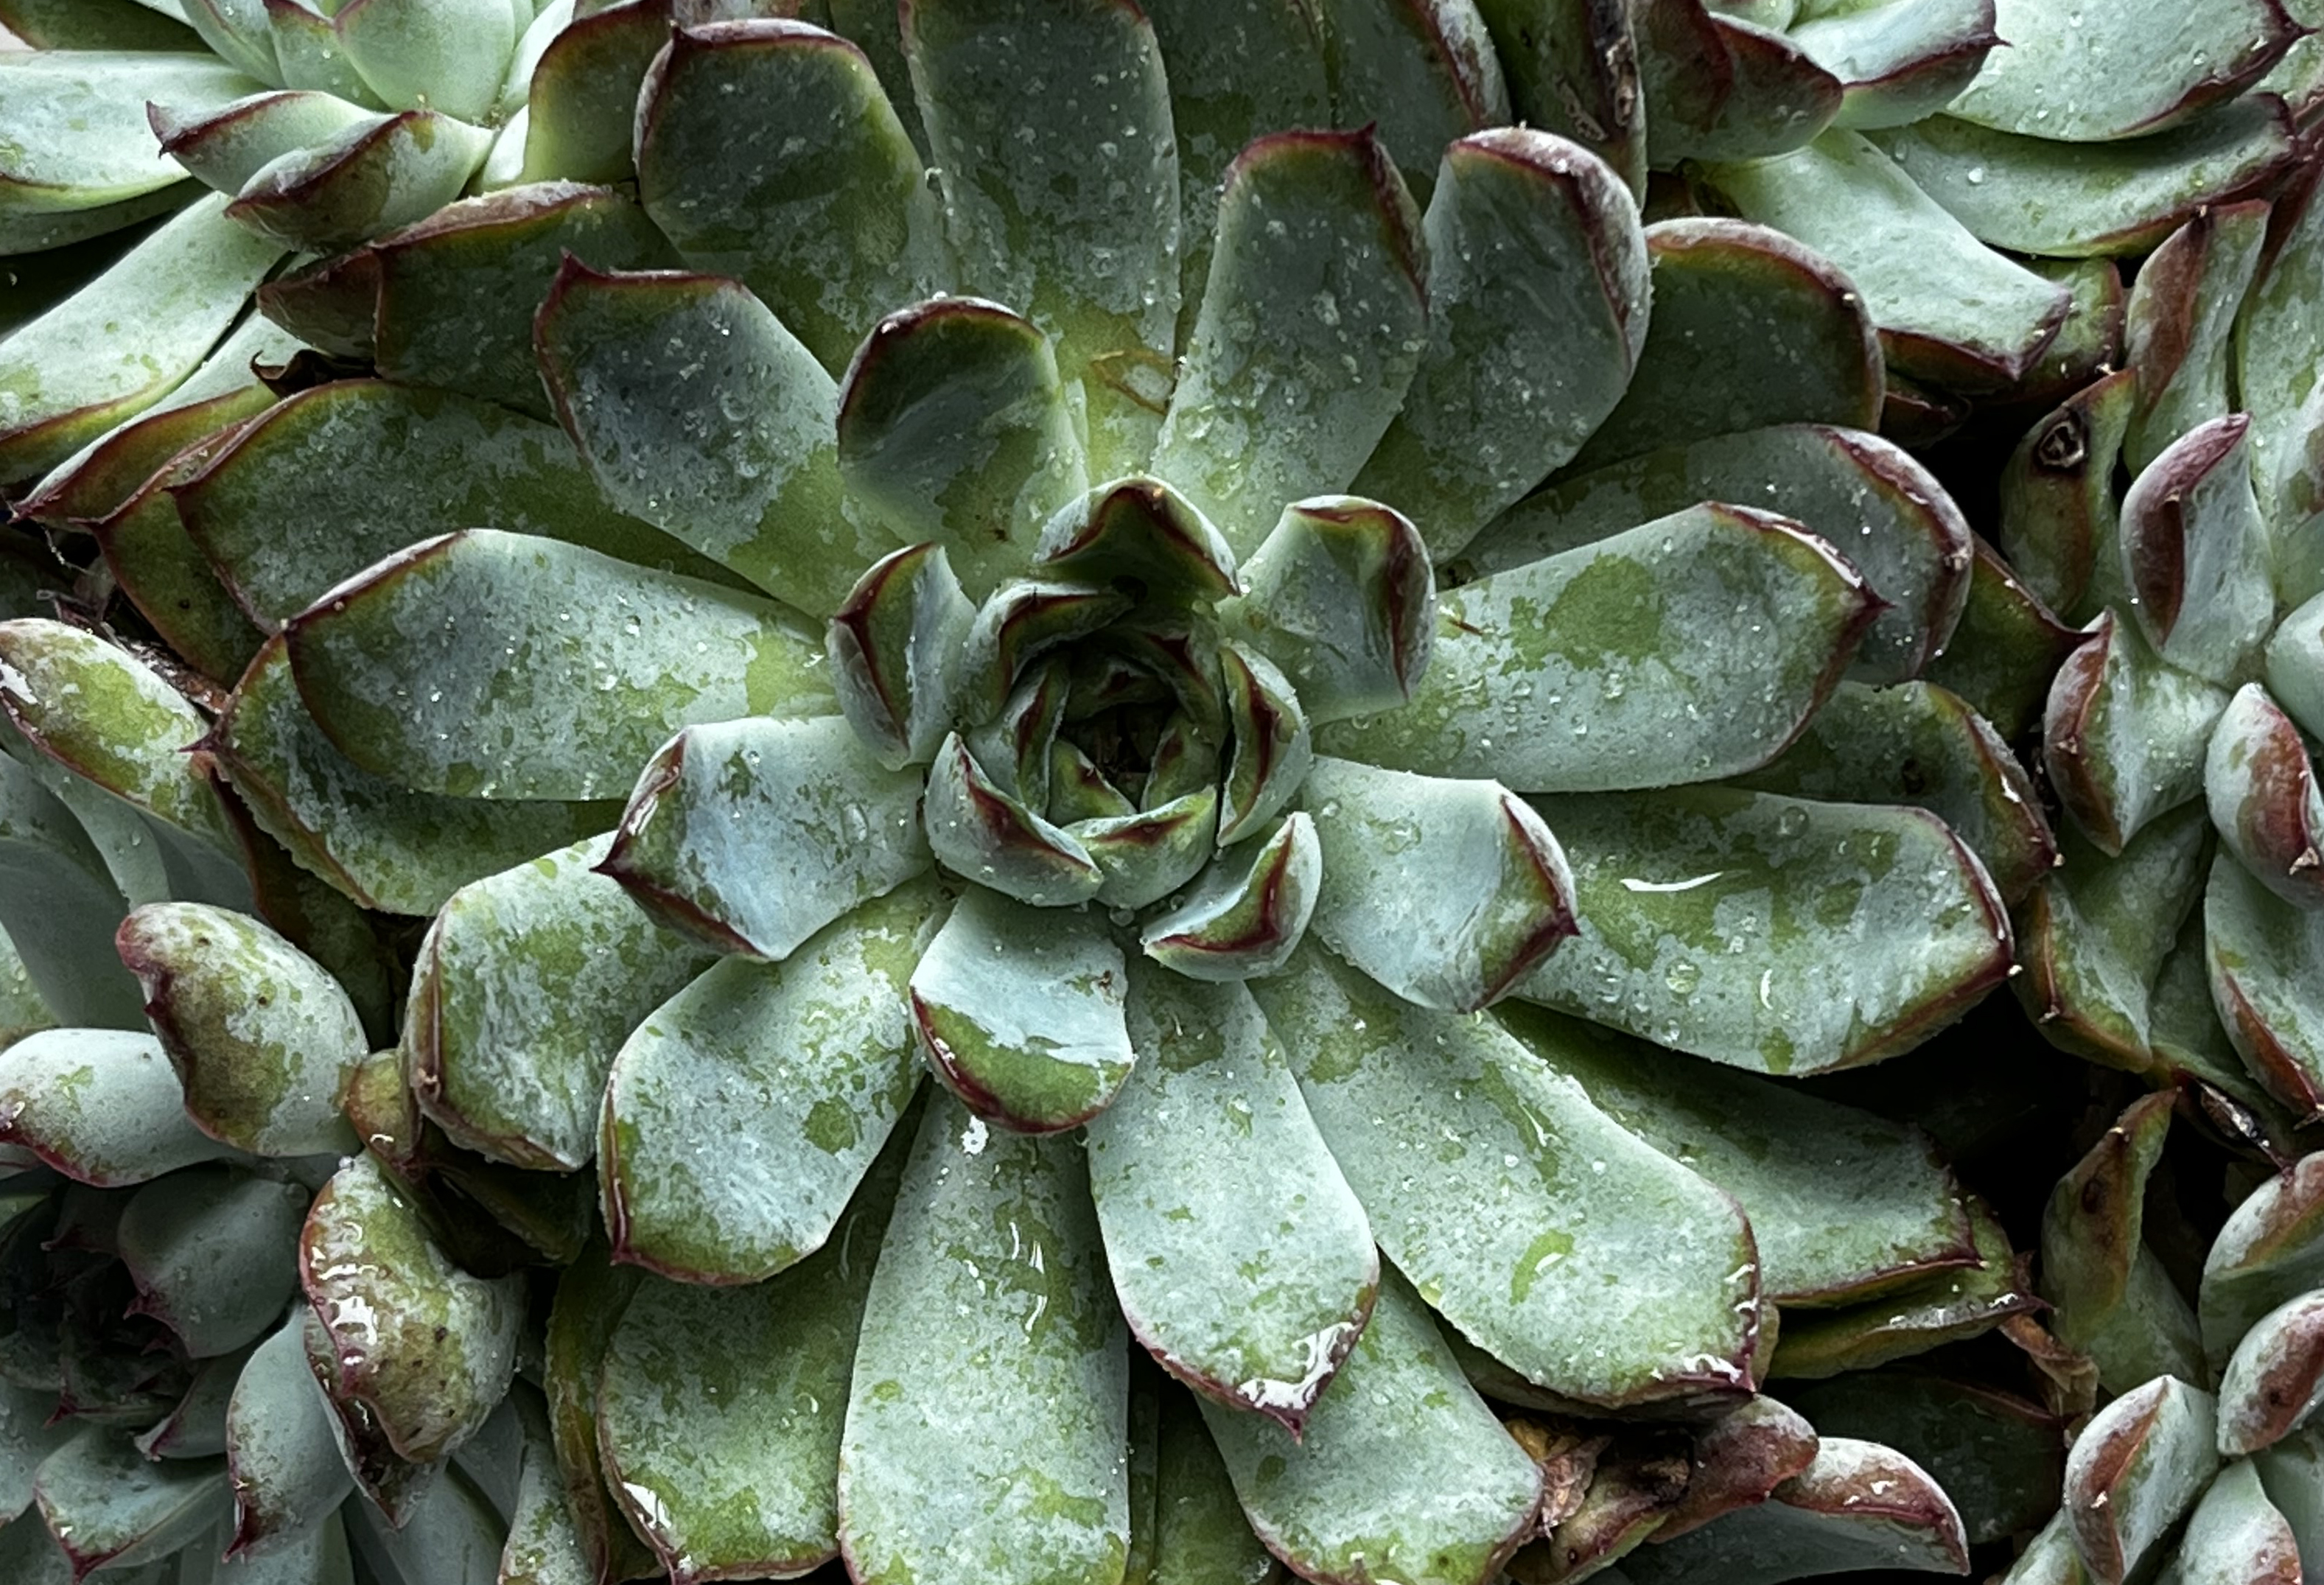 "Succulents" Image by Debra Pike